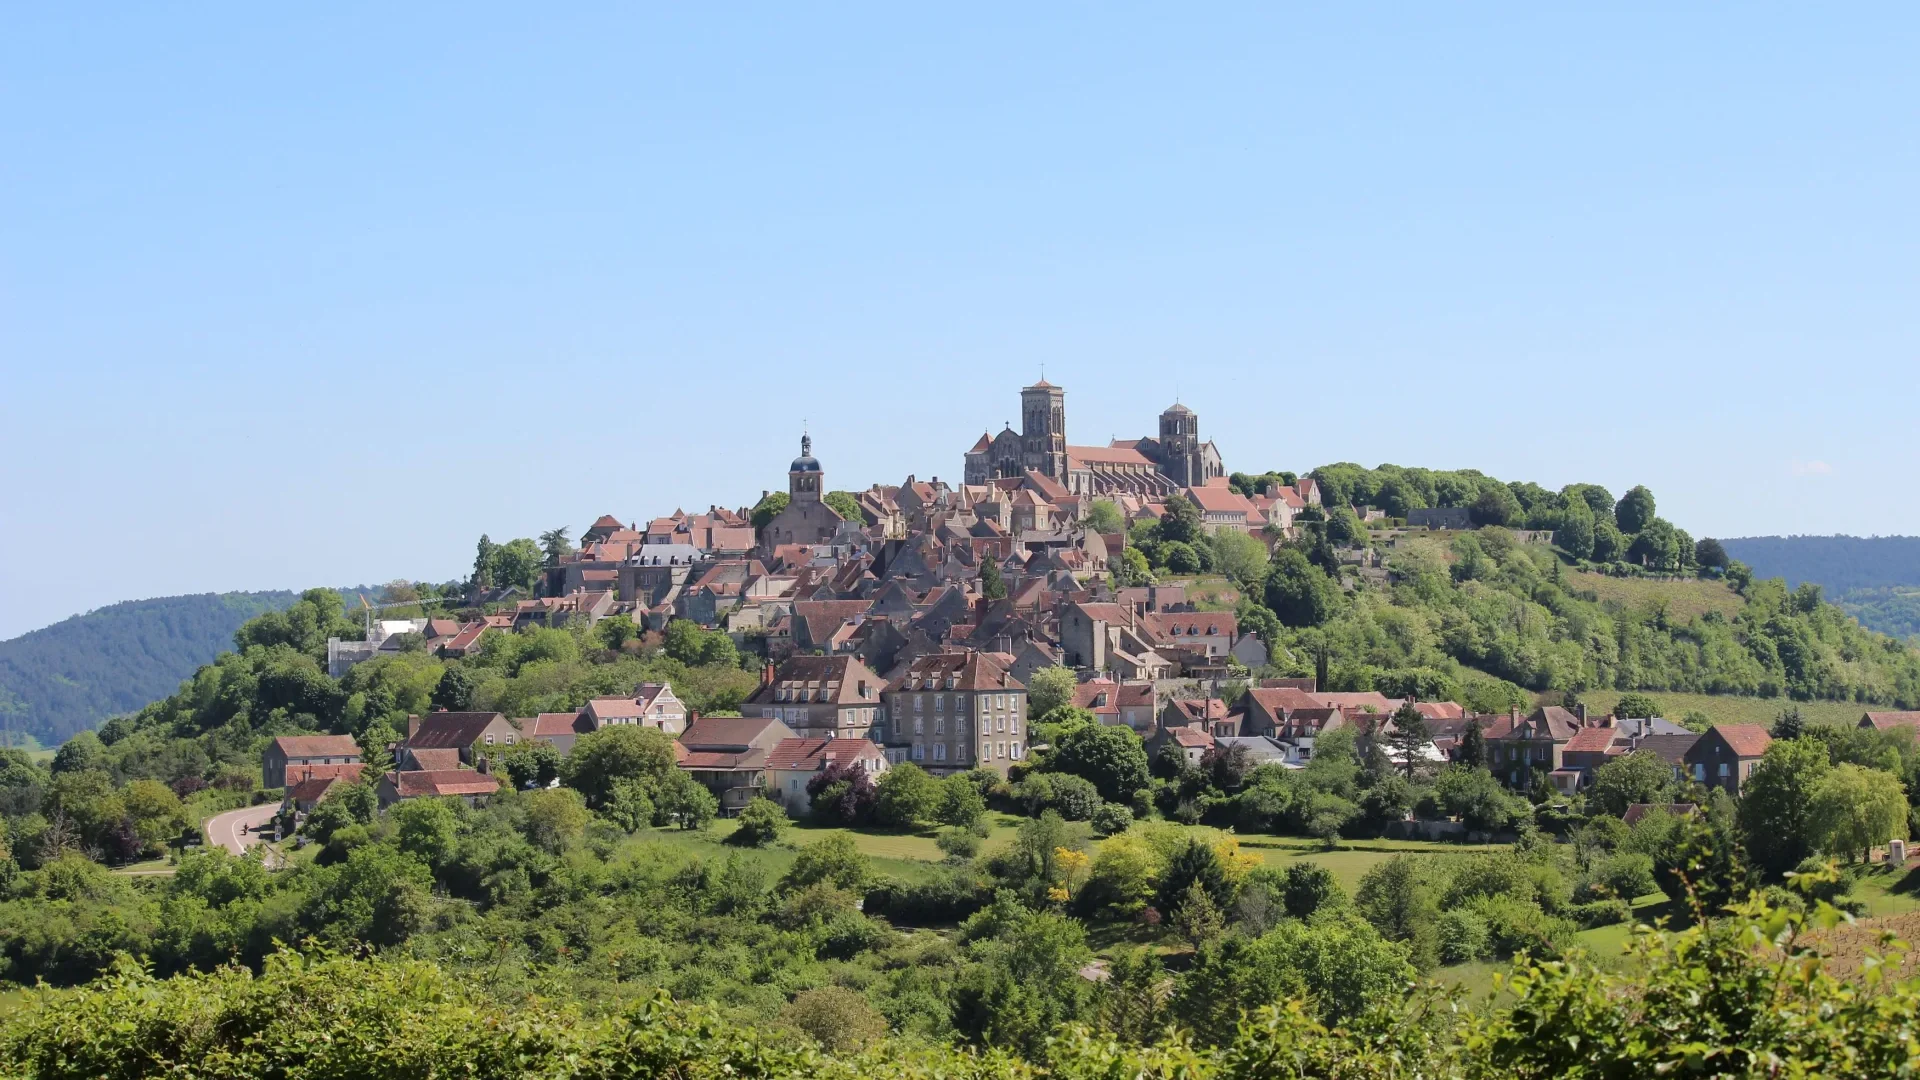 View of the village of Vezelay and its Basilica